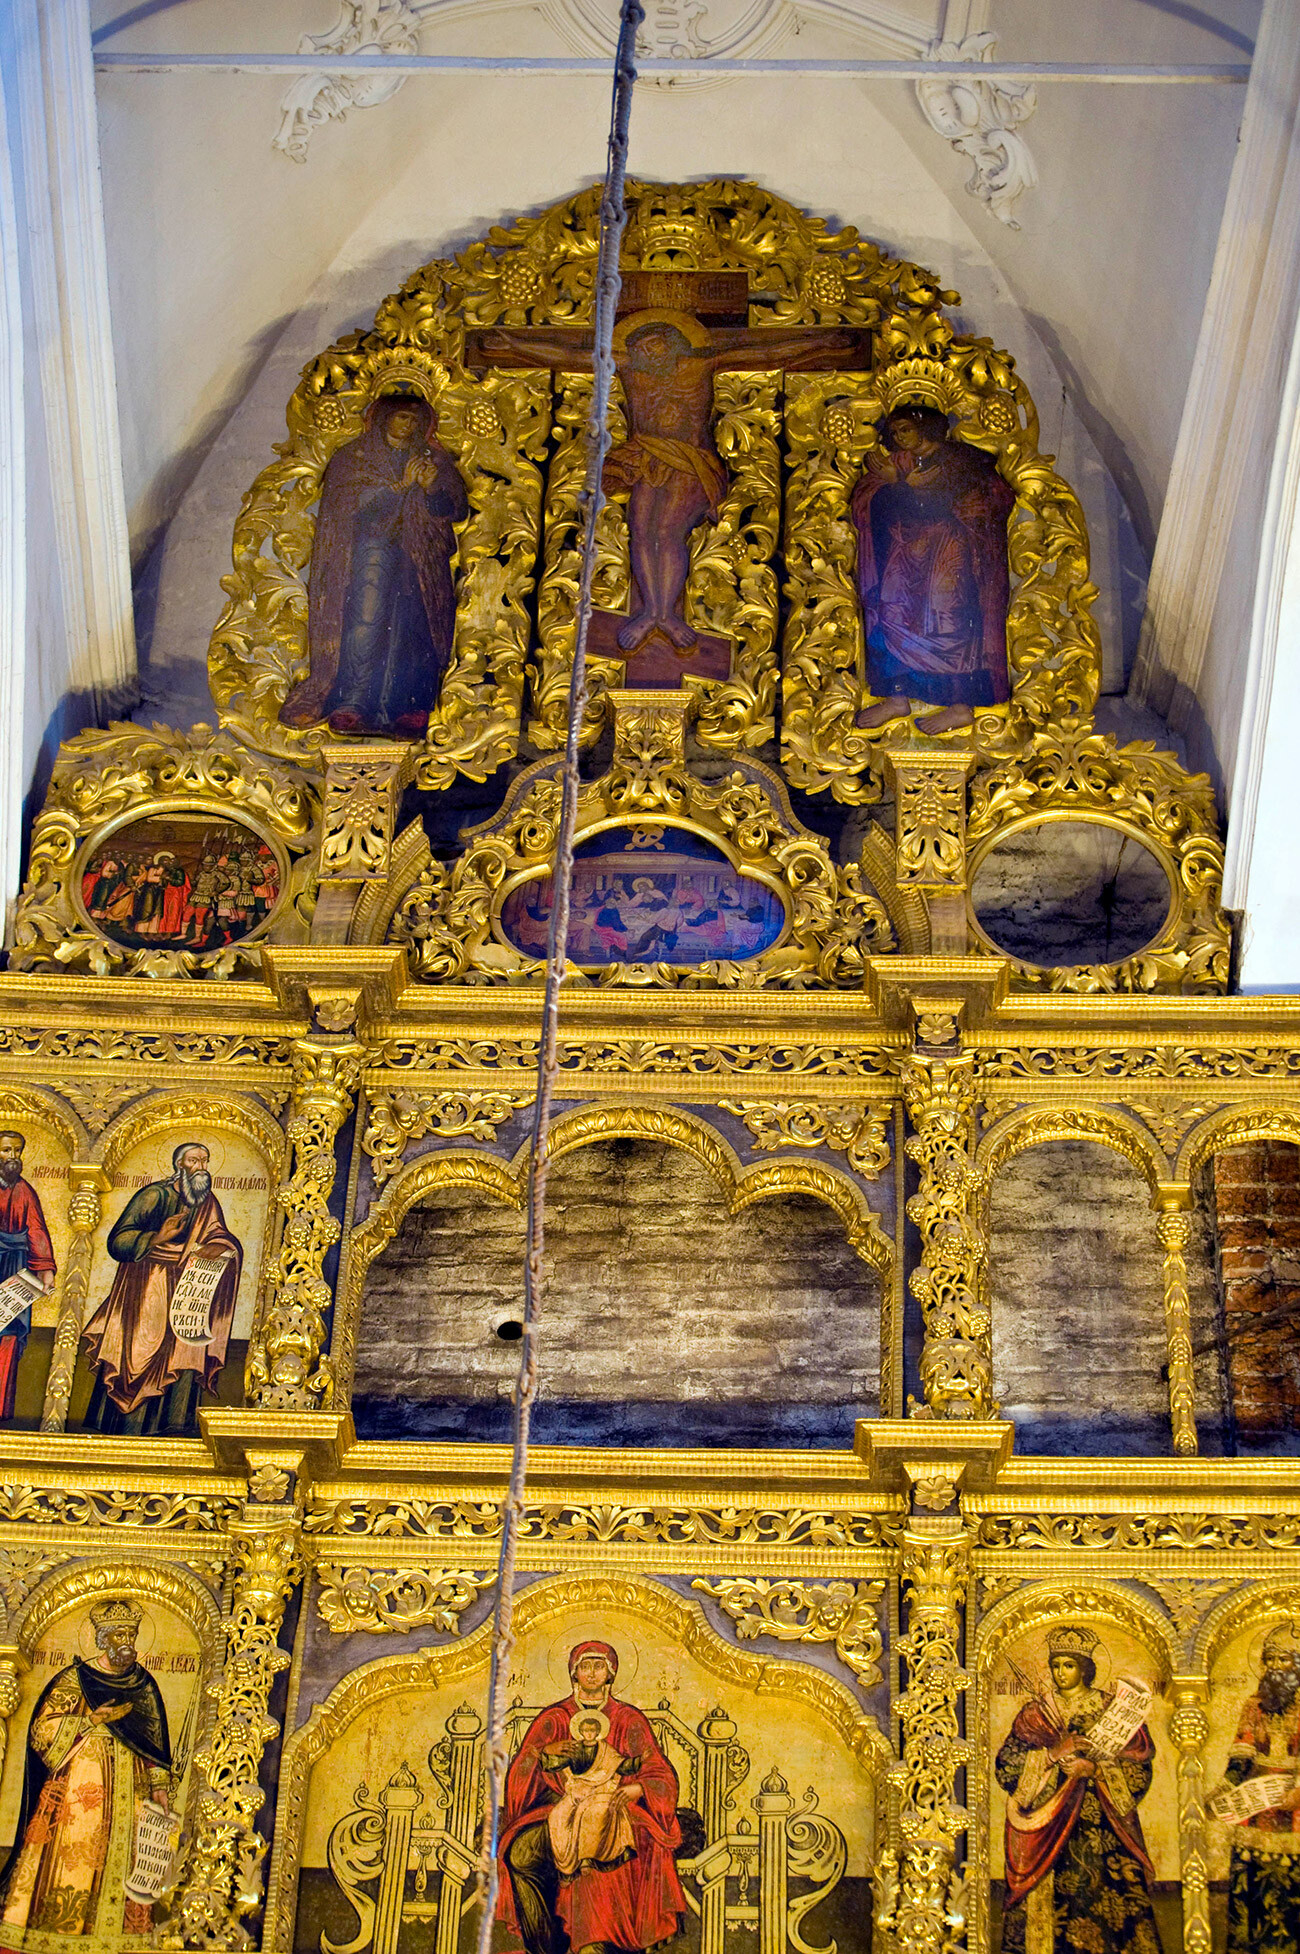  Cathedral of Nativity of the Virgin. Icon screen, central bay with Crucifix & restored icons of Patriarchs Row (on left). December 30, 2009